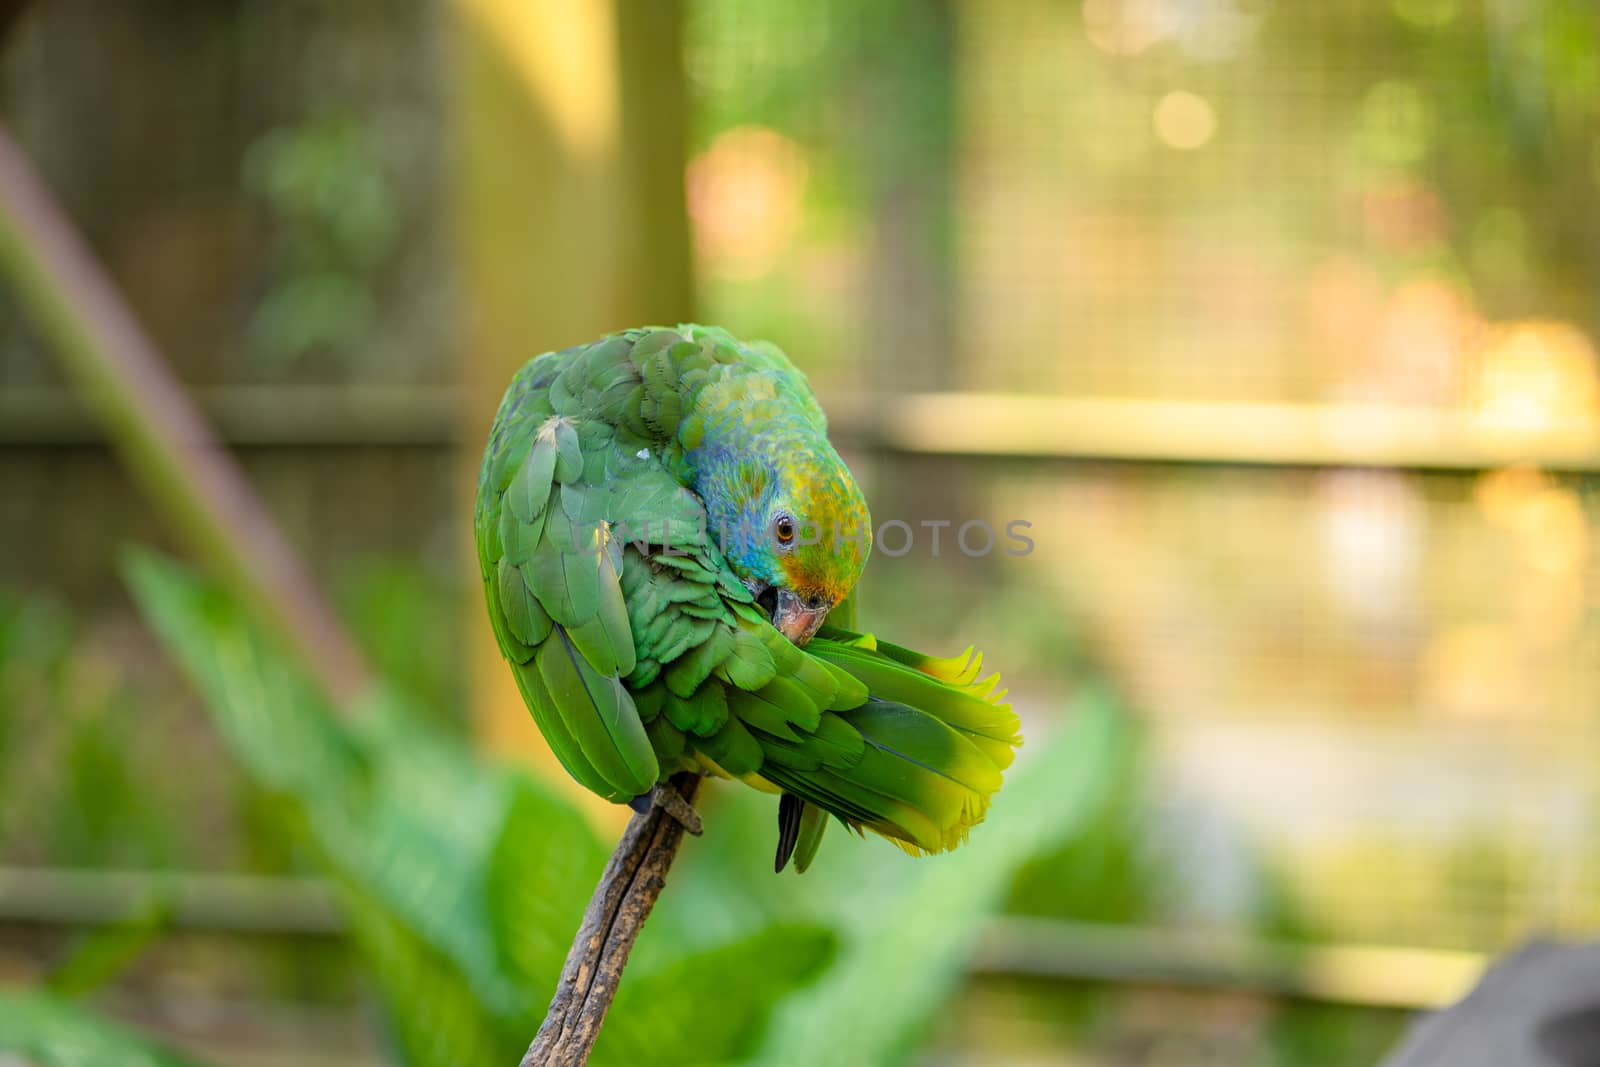 Green parrot close-up portrait. Bird park, wildlife by Try_my_best